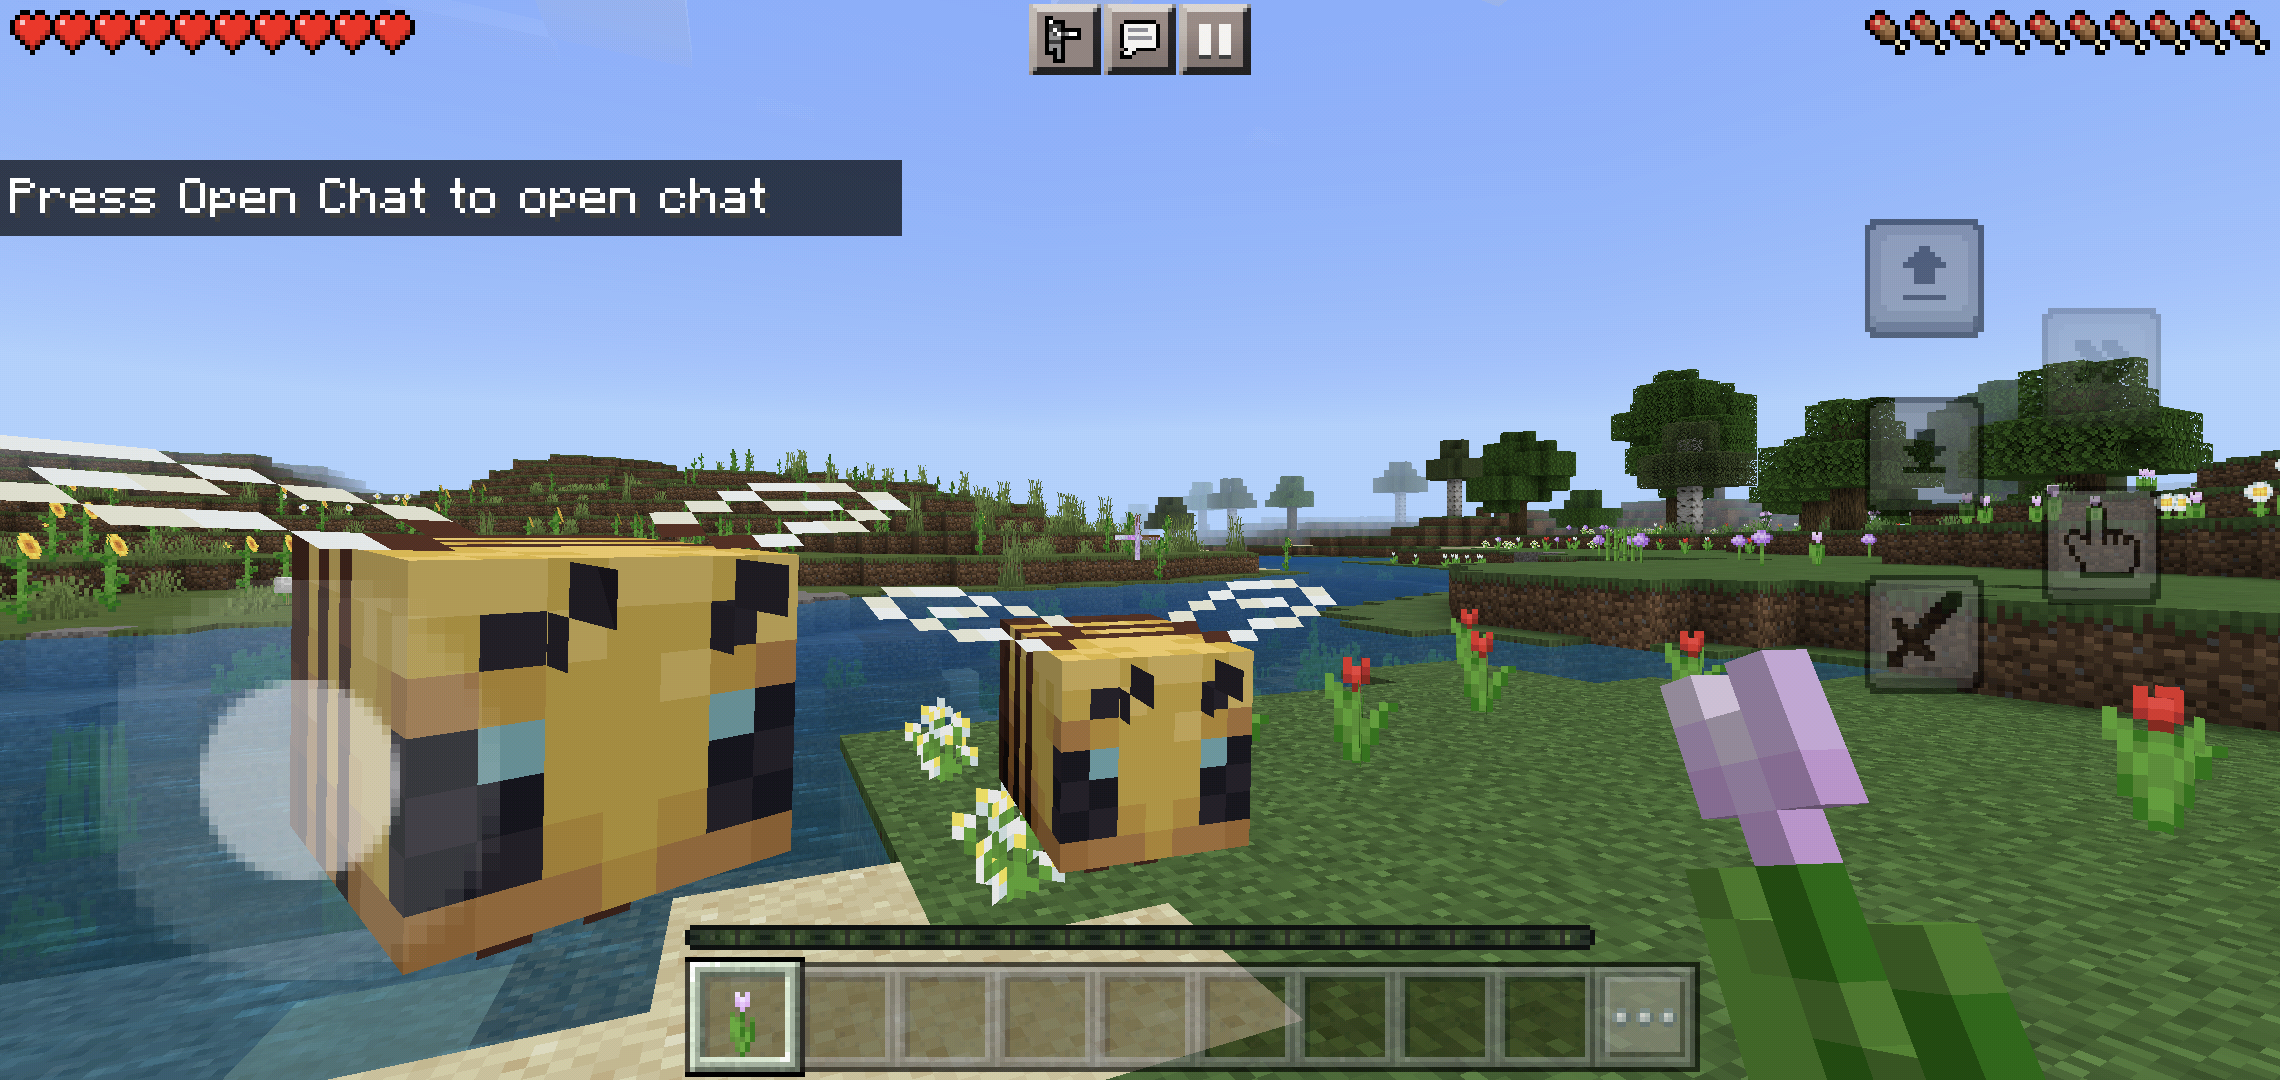 A Minecraft screenshot showing updated mobile touch controls